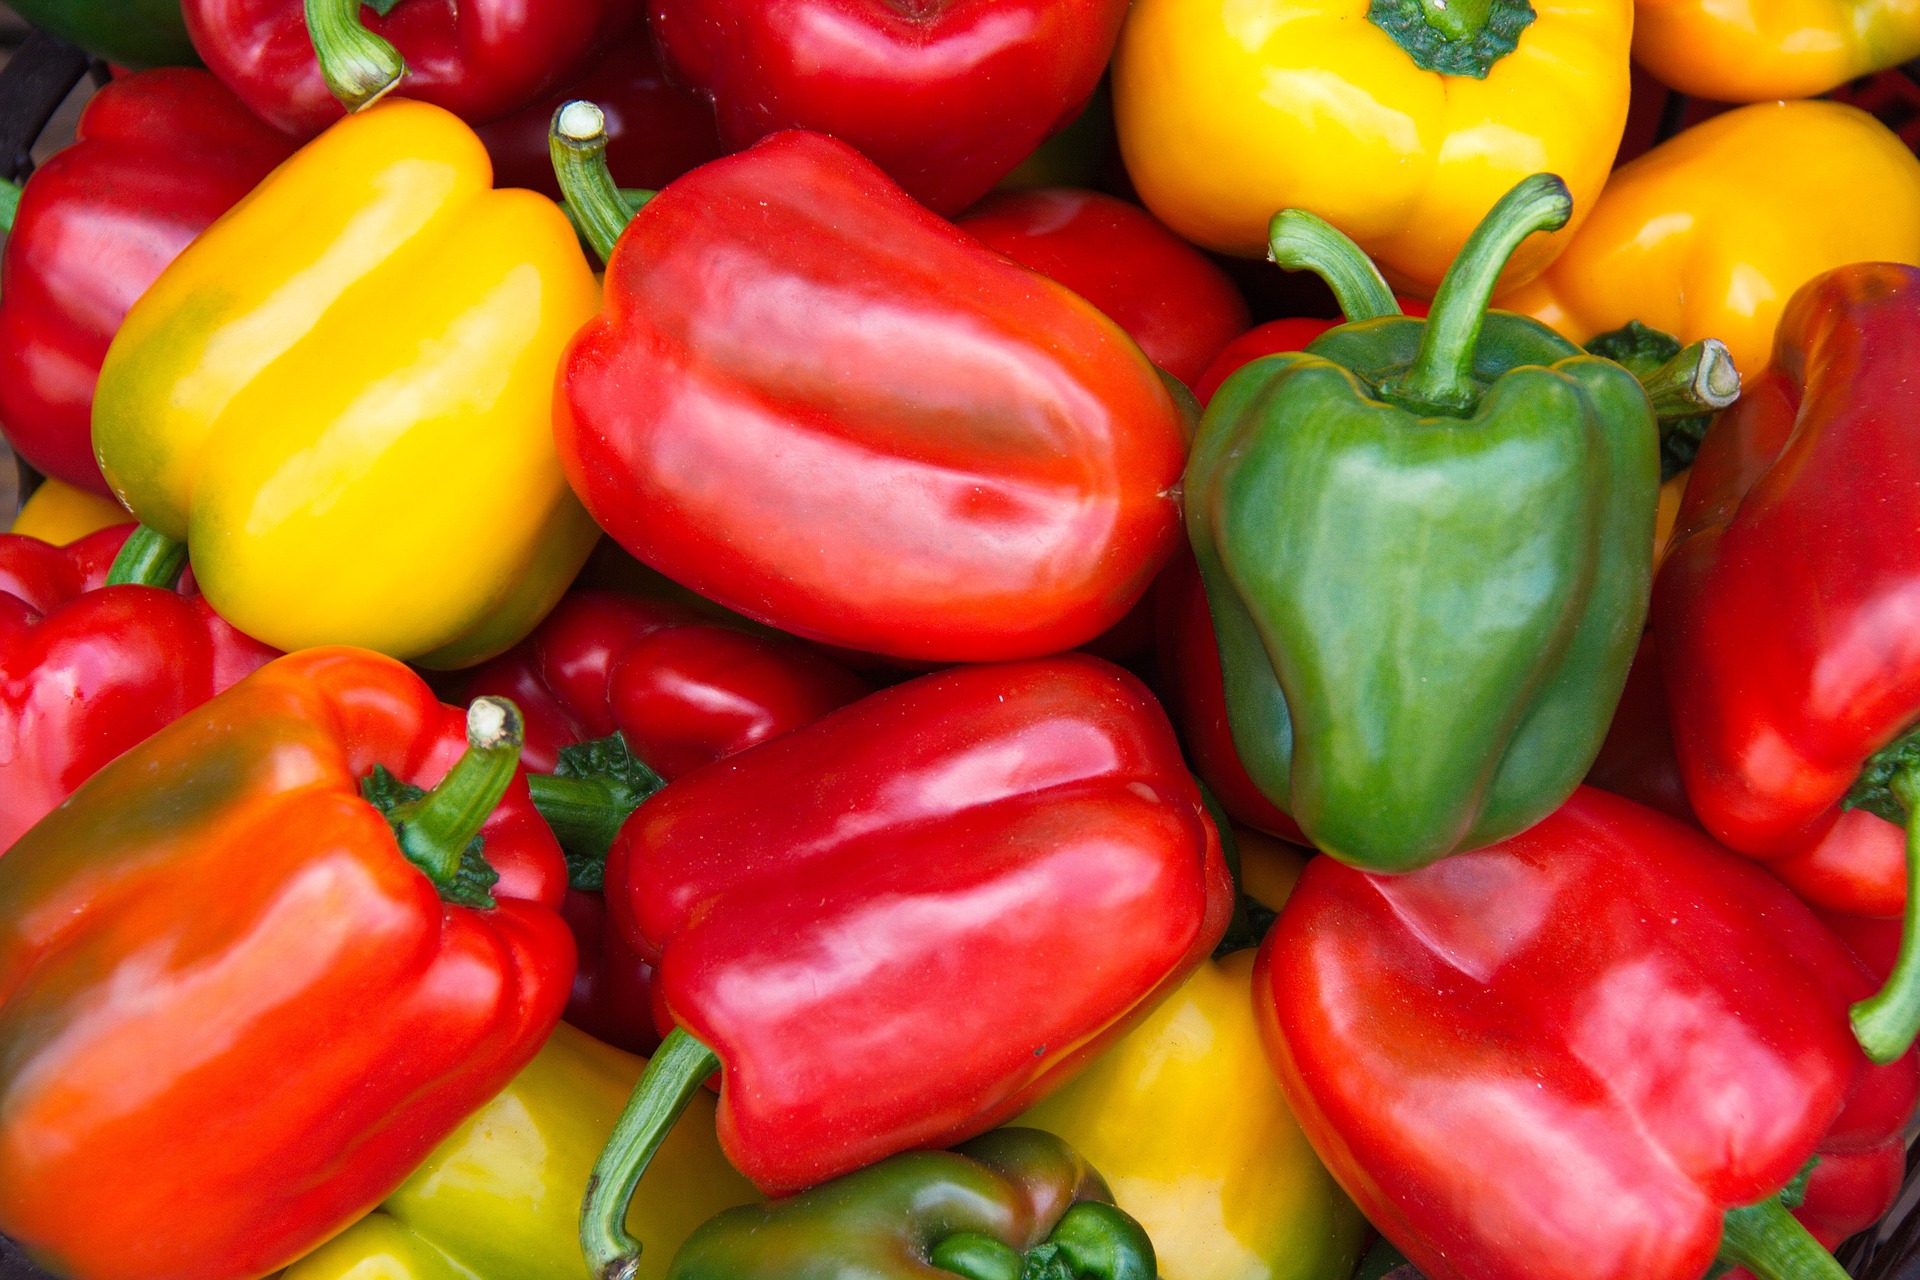 health benefits of bell peppers